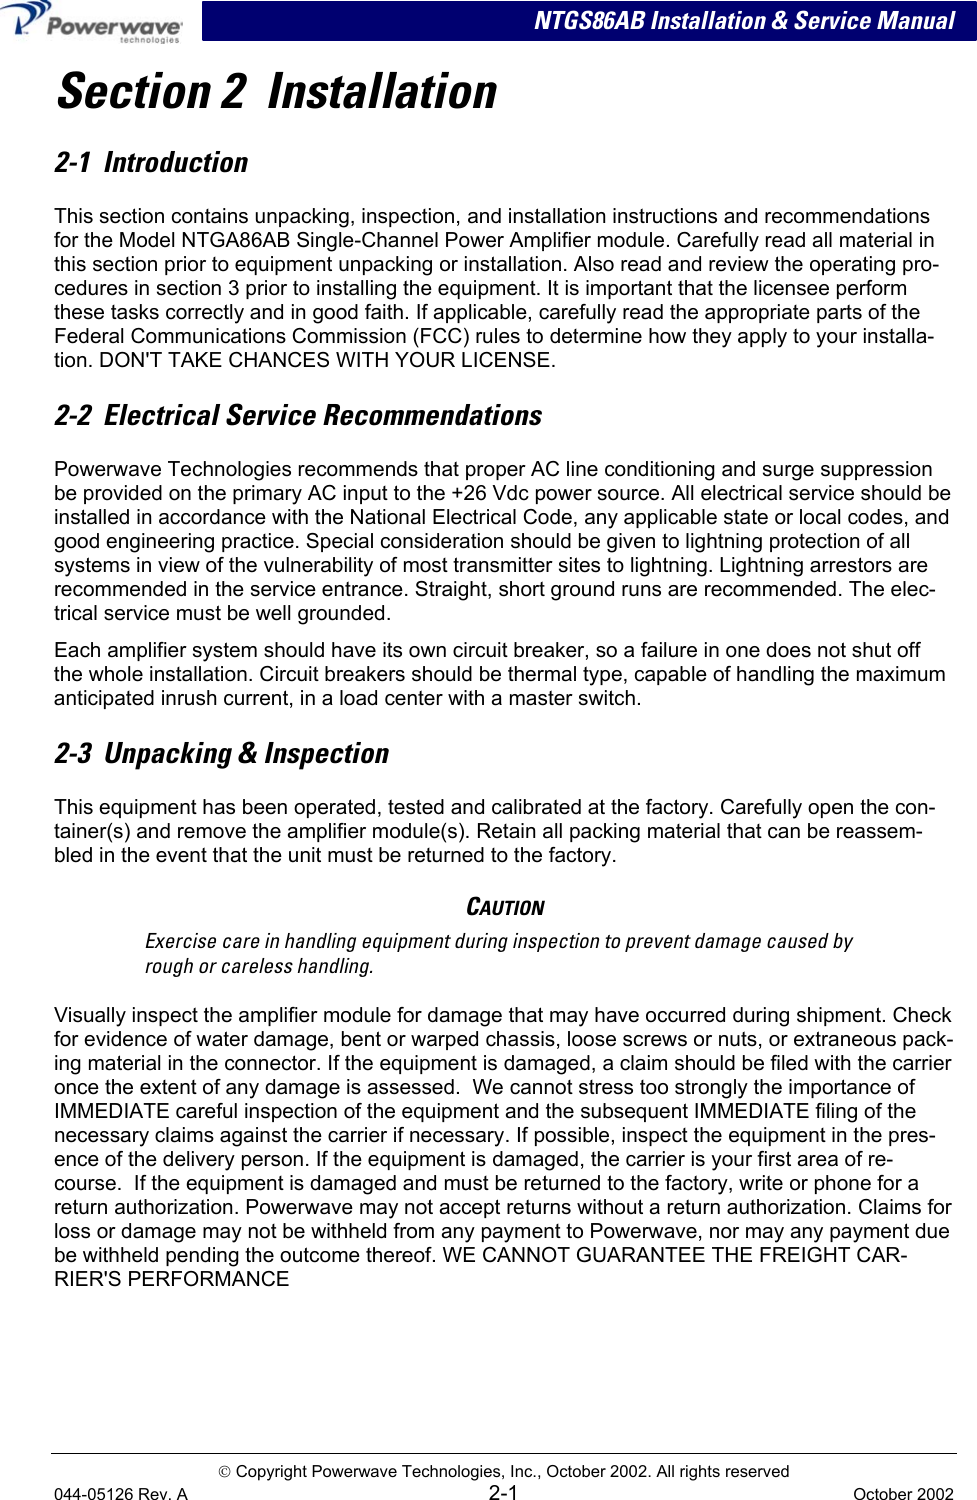  NTGS86AB Installation &amp; Service Manual Section 2  Installation 2-1  Introduction This section contains unpacking, inspection, and installation instructions and recommendations for the Model NTGA86AB Single-Channel Power Amplifier module. Carefully read all material in this section prior to equipment unpacking or installation. Also read and review the operating pro-cedures in section 3 prior to installing the equipment. It is important that the licensee perform these tasks correctly and in good faith. If applicable, carefully read the appropriate parts of the Federal Communications Commission (FCC) rules to determine how they apply to your installa-tion. DON&apos;T TAKE CHANCES WITH YOUR LICENSE. 2-2  Electrical Service Recommendations Powerwave Technologies recommends that proper AC line conditioning and surge suppression be provided on the primary AC input to the +26 Vdc power source. All electrical service should be installed in accordance with the National Electrical Code, any applicable state or local codes, and good engineering practice. Special consideration should be given to lightning protection of all systems in view of the vulnerability of most transmitter sites to lightning. Lightning arrestors are recommended in the service entrance. Straight, short ground runs are recommended. The elec-trical service must be well grounded. Each amplifier system should have its own circuit breaker, so a failure in one does not shut off the whole installation. Circuit breakers should be thermal type, capable of handling the maximum anticipated inrush current, in a load center with a master switch. 2-3  Unpacking &amp; Inspection This equipment has been operated, tested and calibrated at the factory. Carefully open the con-tainer(s) and remove the amplifier module(s). Retain all packing material that can be reassem-bled in the event that the unit must be returned to the factory. CAUTION Exercise care in handling equipment during inspection to prevent damage caused by rough or careless handling. Visually inspect the amplifier module for damage that may have occurred during shipment. Check for evidence of water damage, bent or warped chassis, loose screws or nuts, or extraneous pack-ing material in the connector. If the equipment is damaged, a claim should be filed with the carrier once the extent of any damage is assessed.  We cannot stress too strongly the importance of IMMEDIATE careful inspection of the equipment and the subsequent IMMEDIATE filing of the necessary claims against the carrier if necessary. If possible, inspect the equipment in the pres-ence of the delivery person. If the equipment is damaged, the carrier is your first area of re-course.  If the equipment is damaged and must be returned to the factory, write or phone for a return authorization. Powerwave may not accept returns without a return authorization. Claims for loss or damage may not be withheld from any payment to Powerwave, nor may any payment due be withheld pending the outcome thereof. WE CANNOT GUARANTEE THE FREIGHT CAR-RIER&apos;S PERFORMANCE  Copyright Powerwave Technologies, Inc., October 2002. All rights reserved 044-05126 Rev. A 2-1  October 2002 